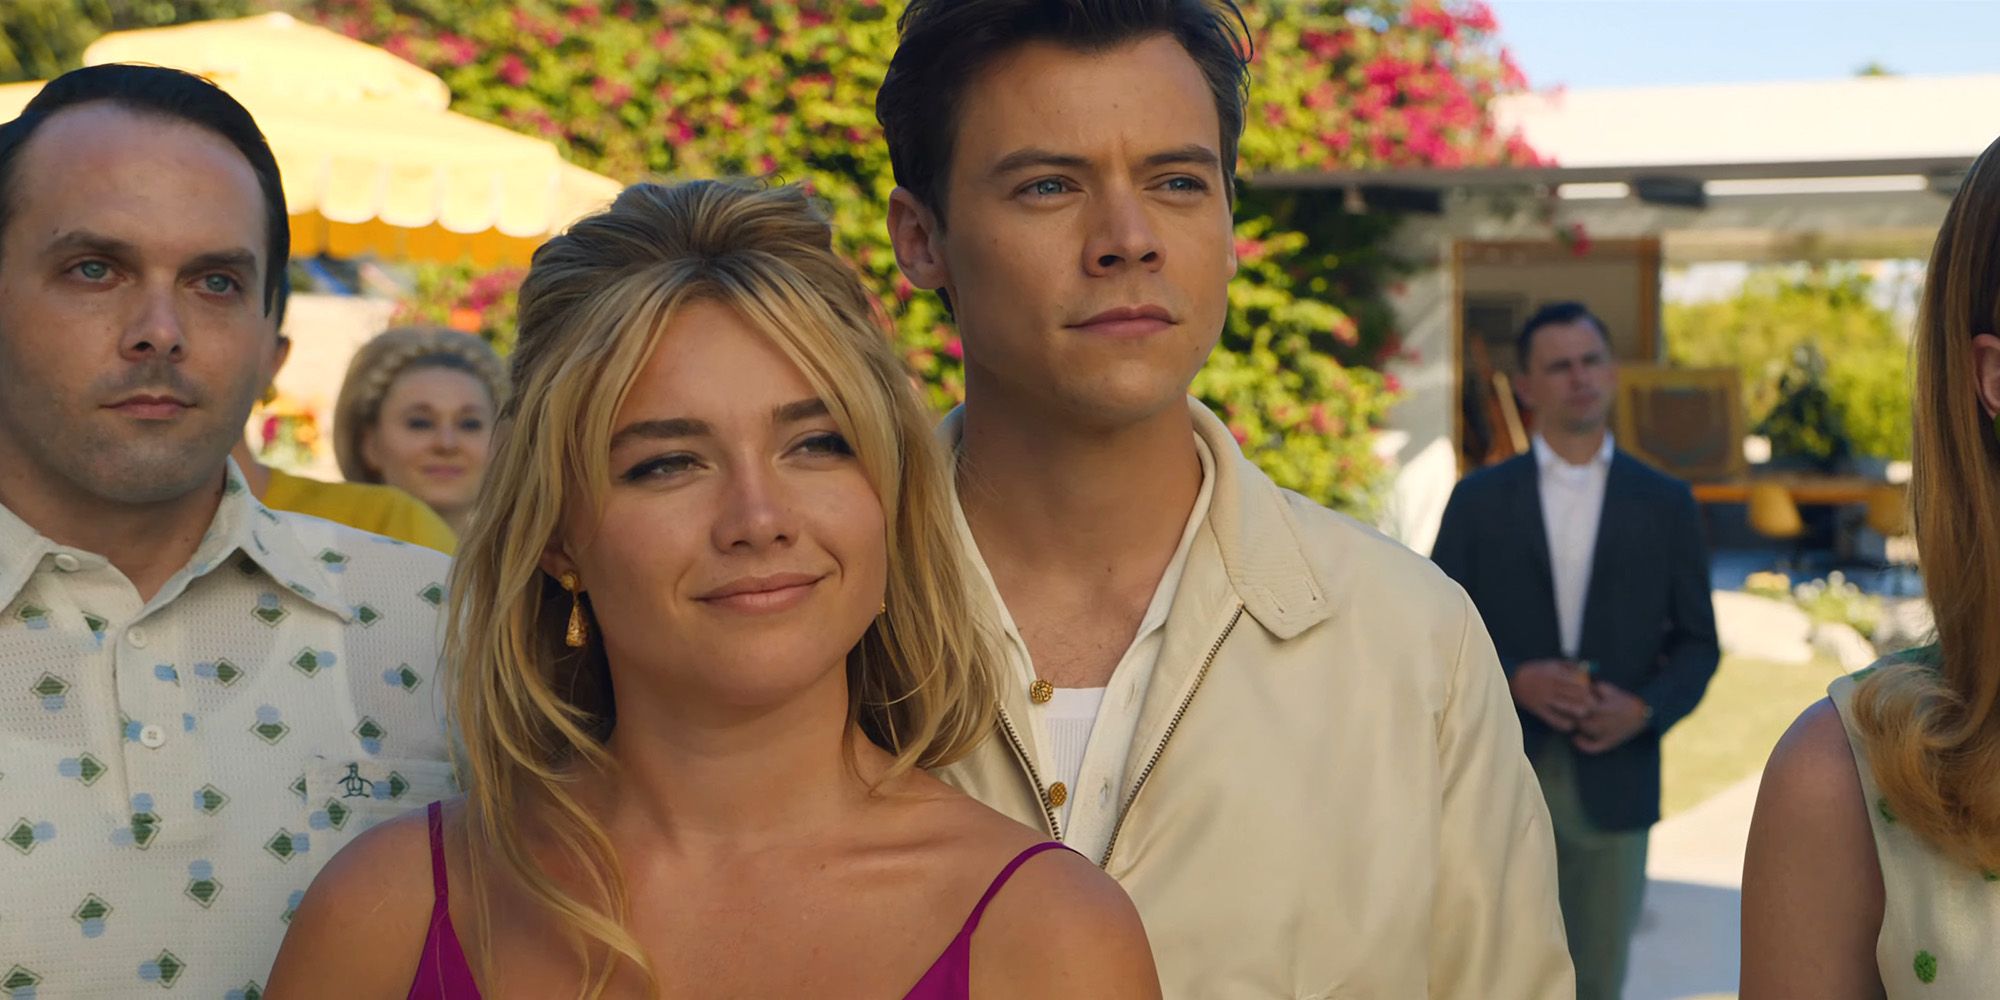 One Harry Styles Scene Stunned Don’t Worry Darling Cast, Says Olivia Wilde